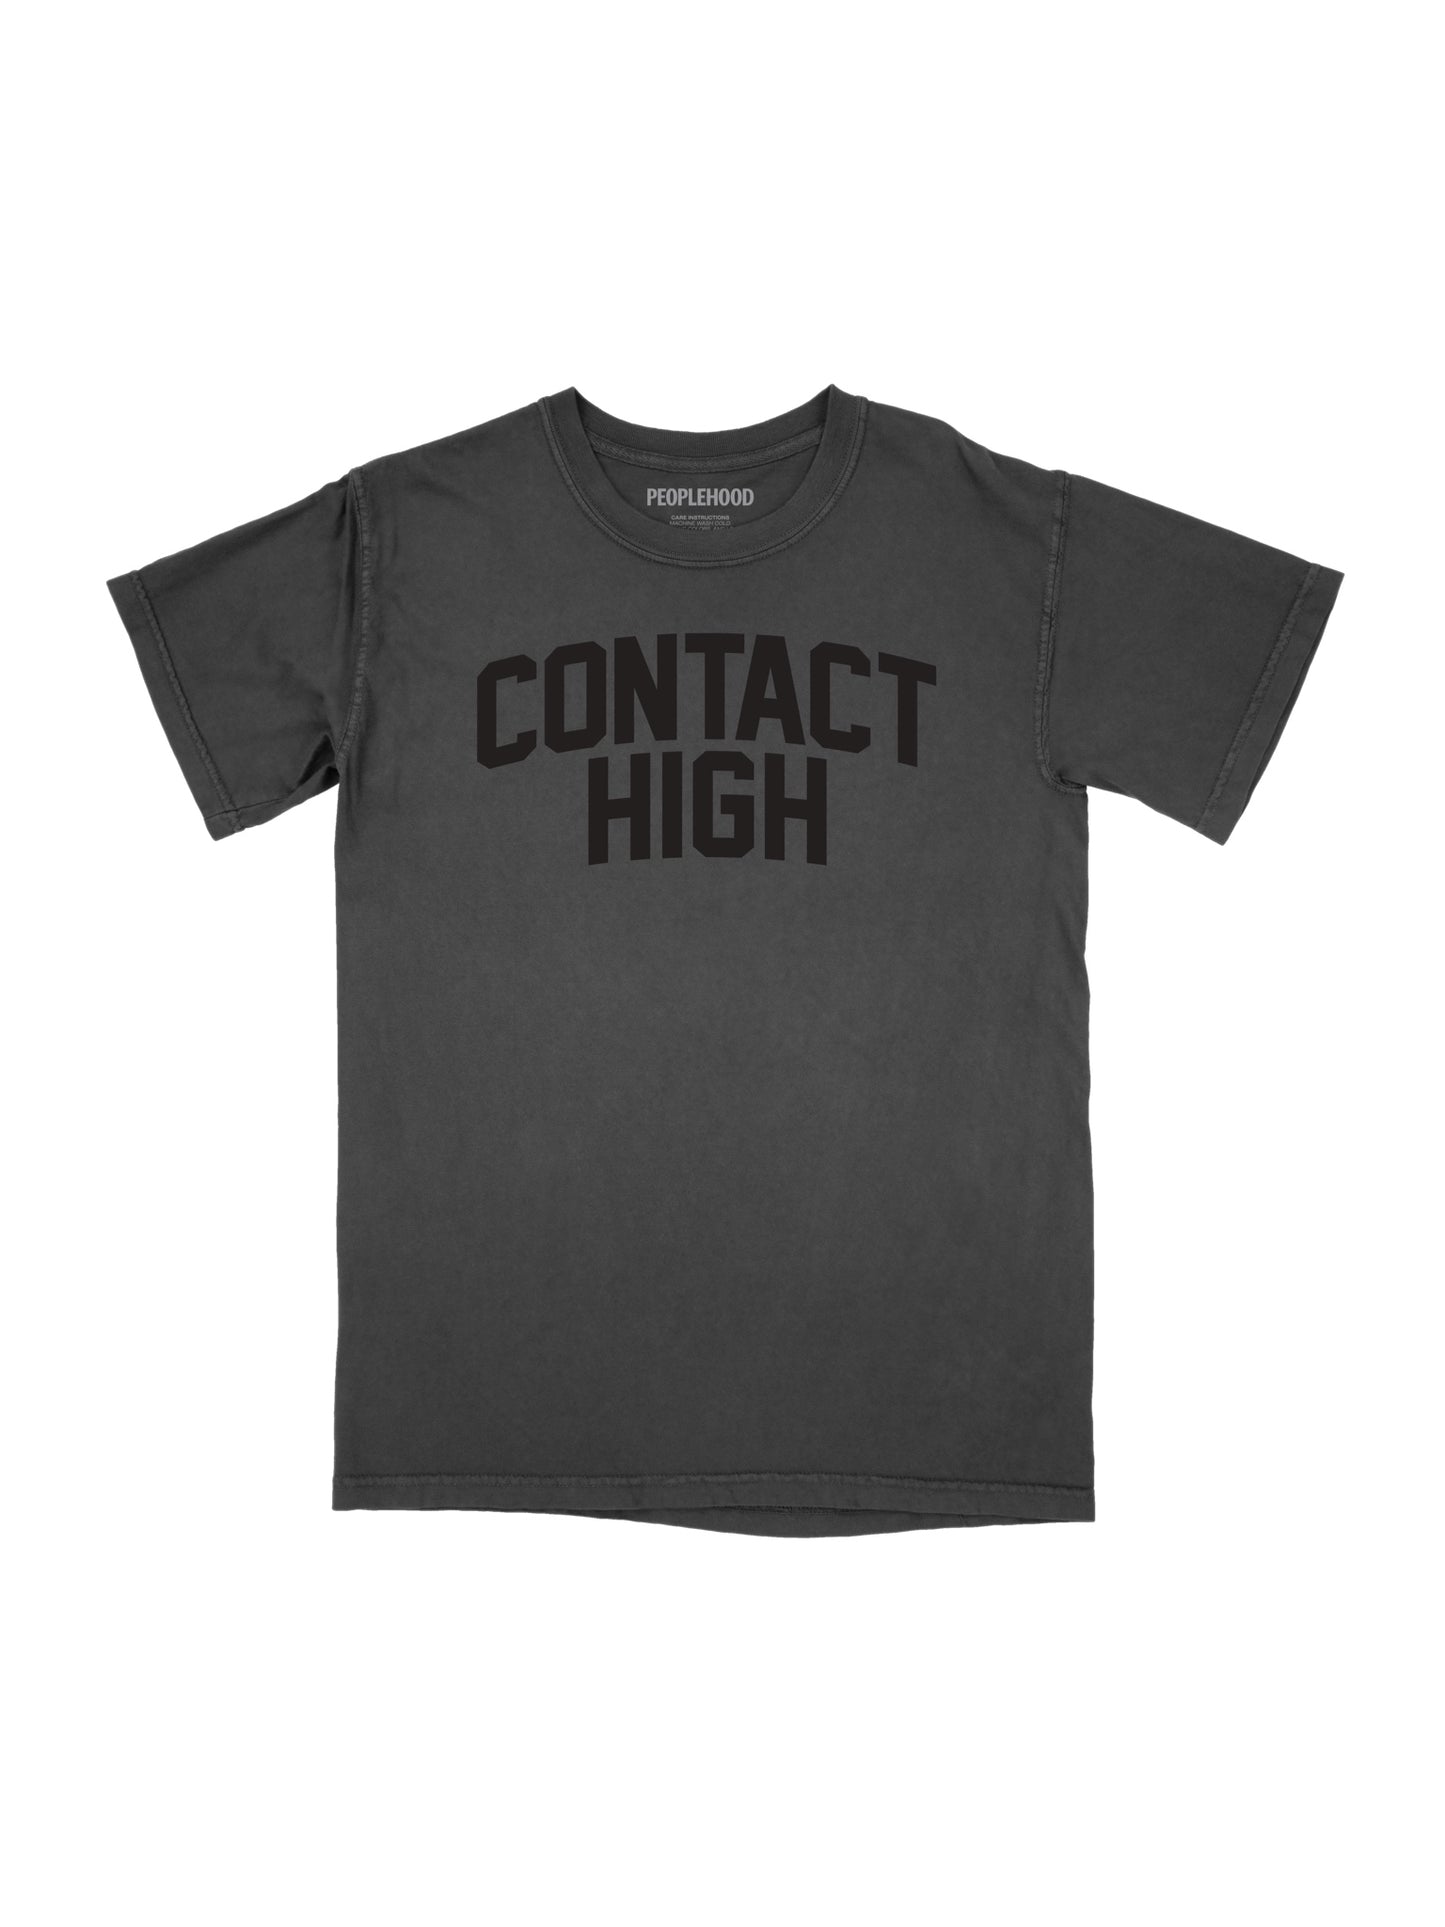 Vintage black (dark grey) short sleeve t-shirt with "Contact High" written across the chest in black